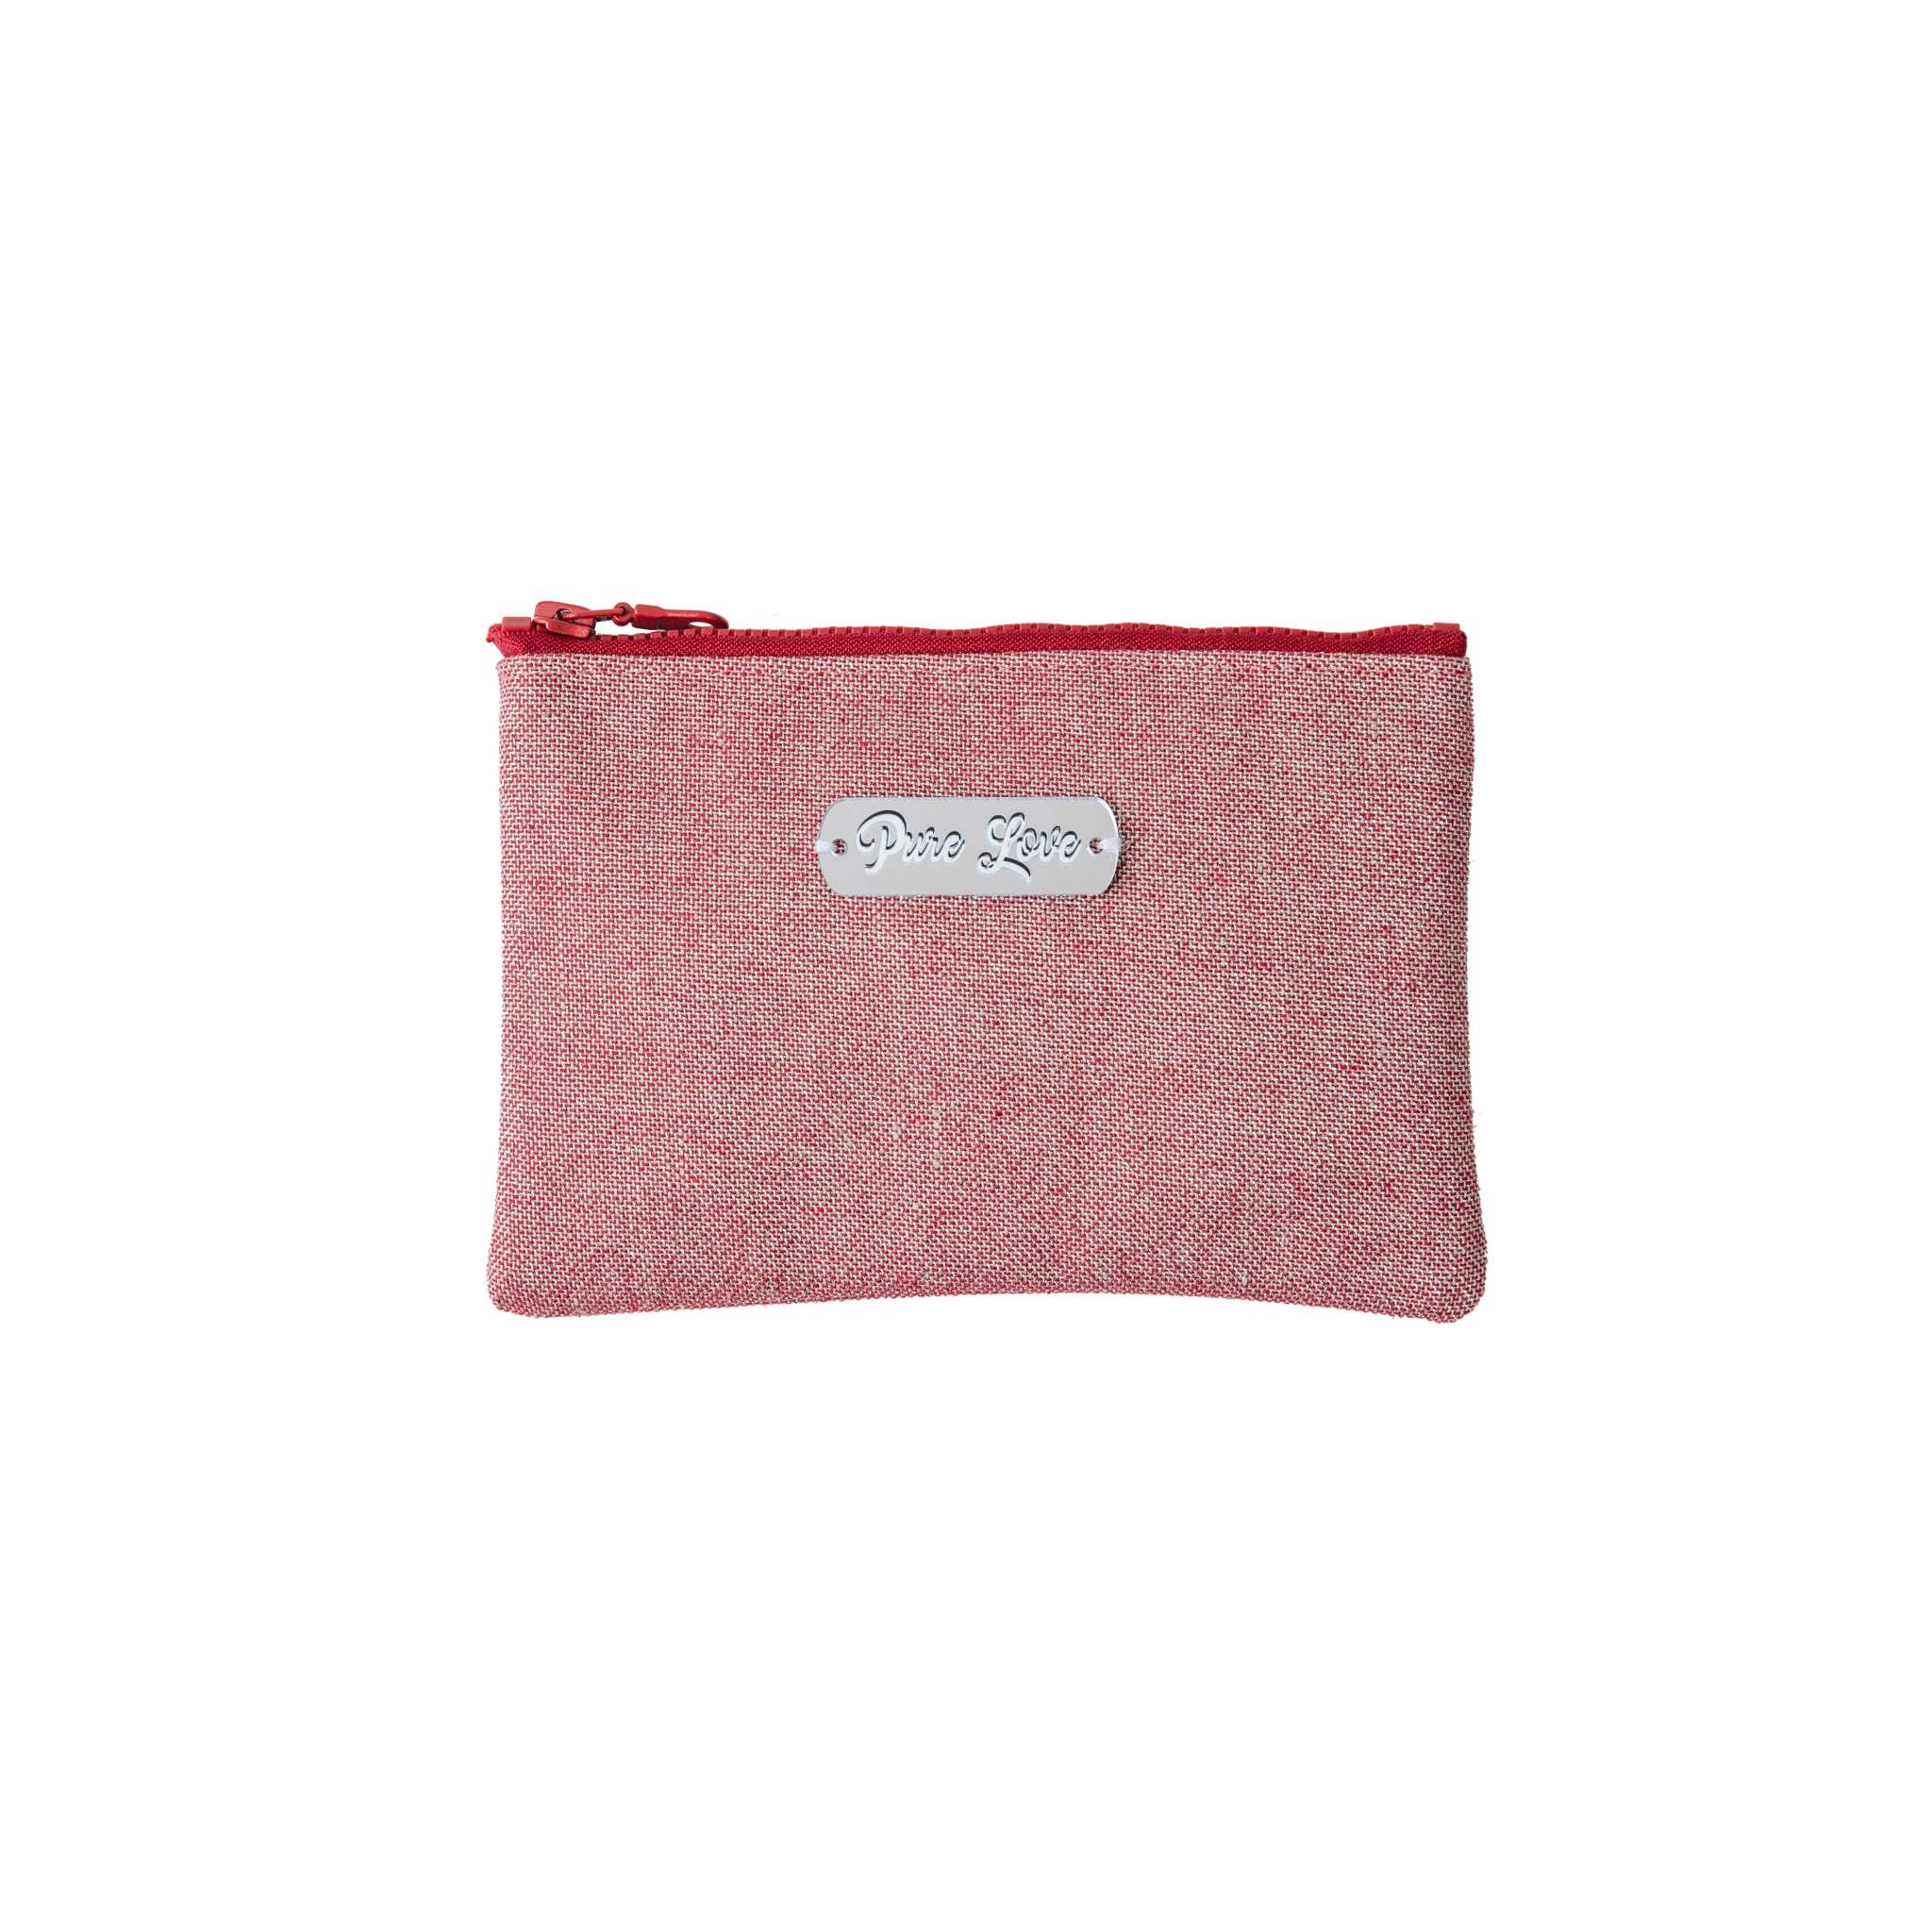 GALATIA Pouch | Red Sparkle Pure Love